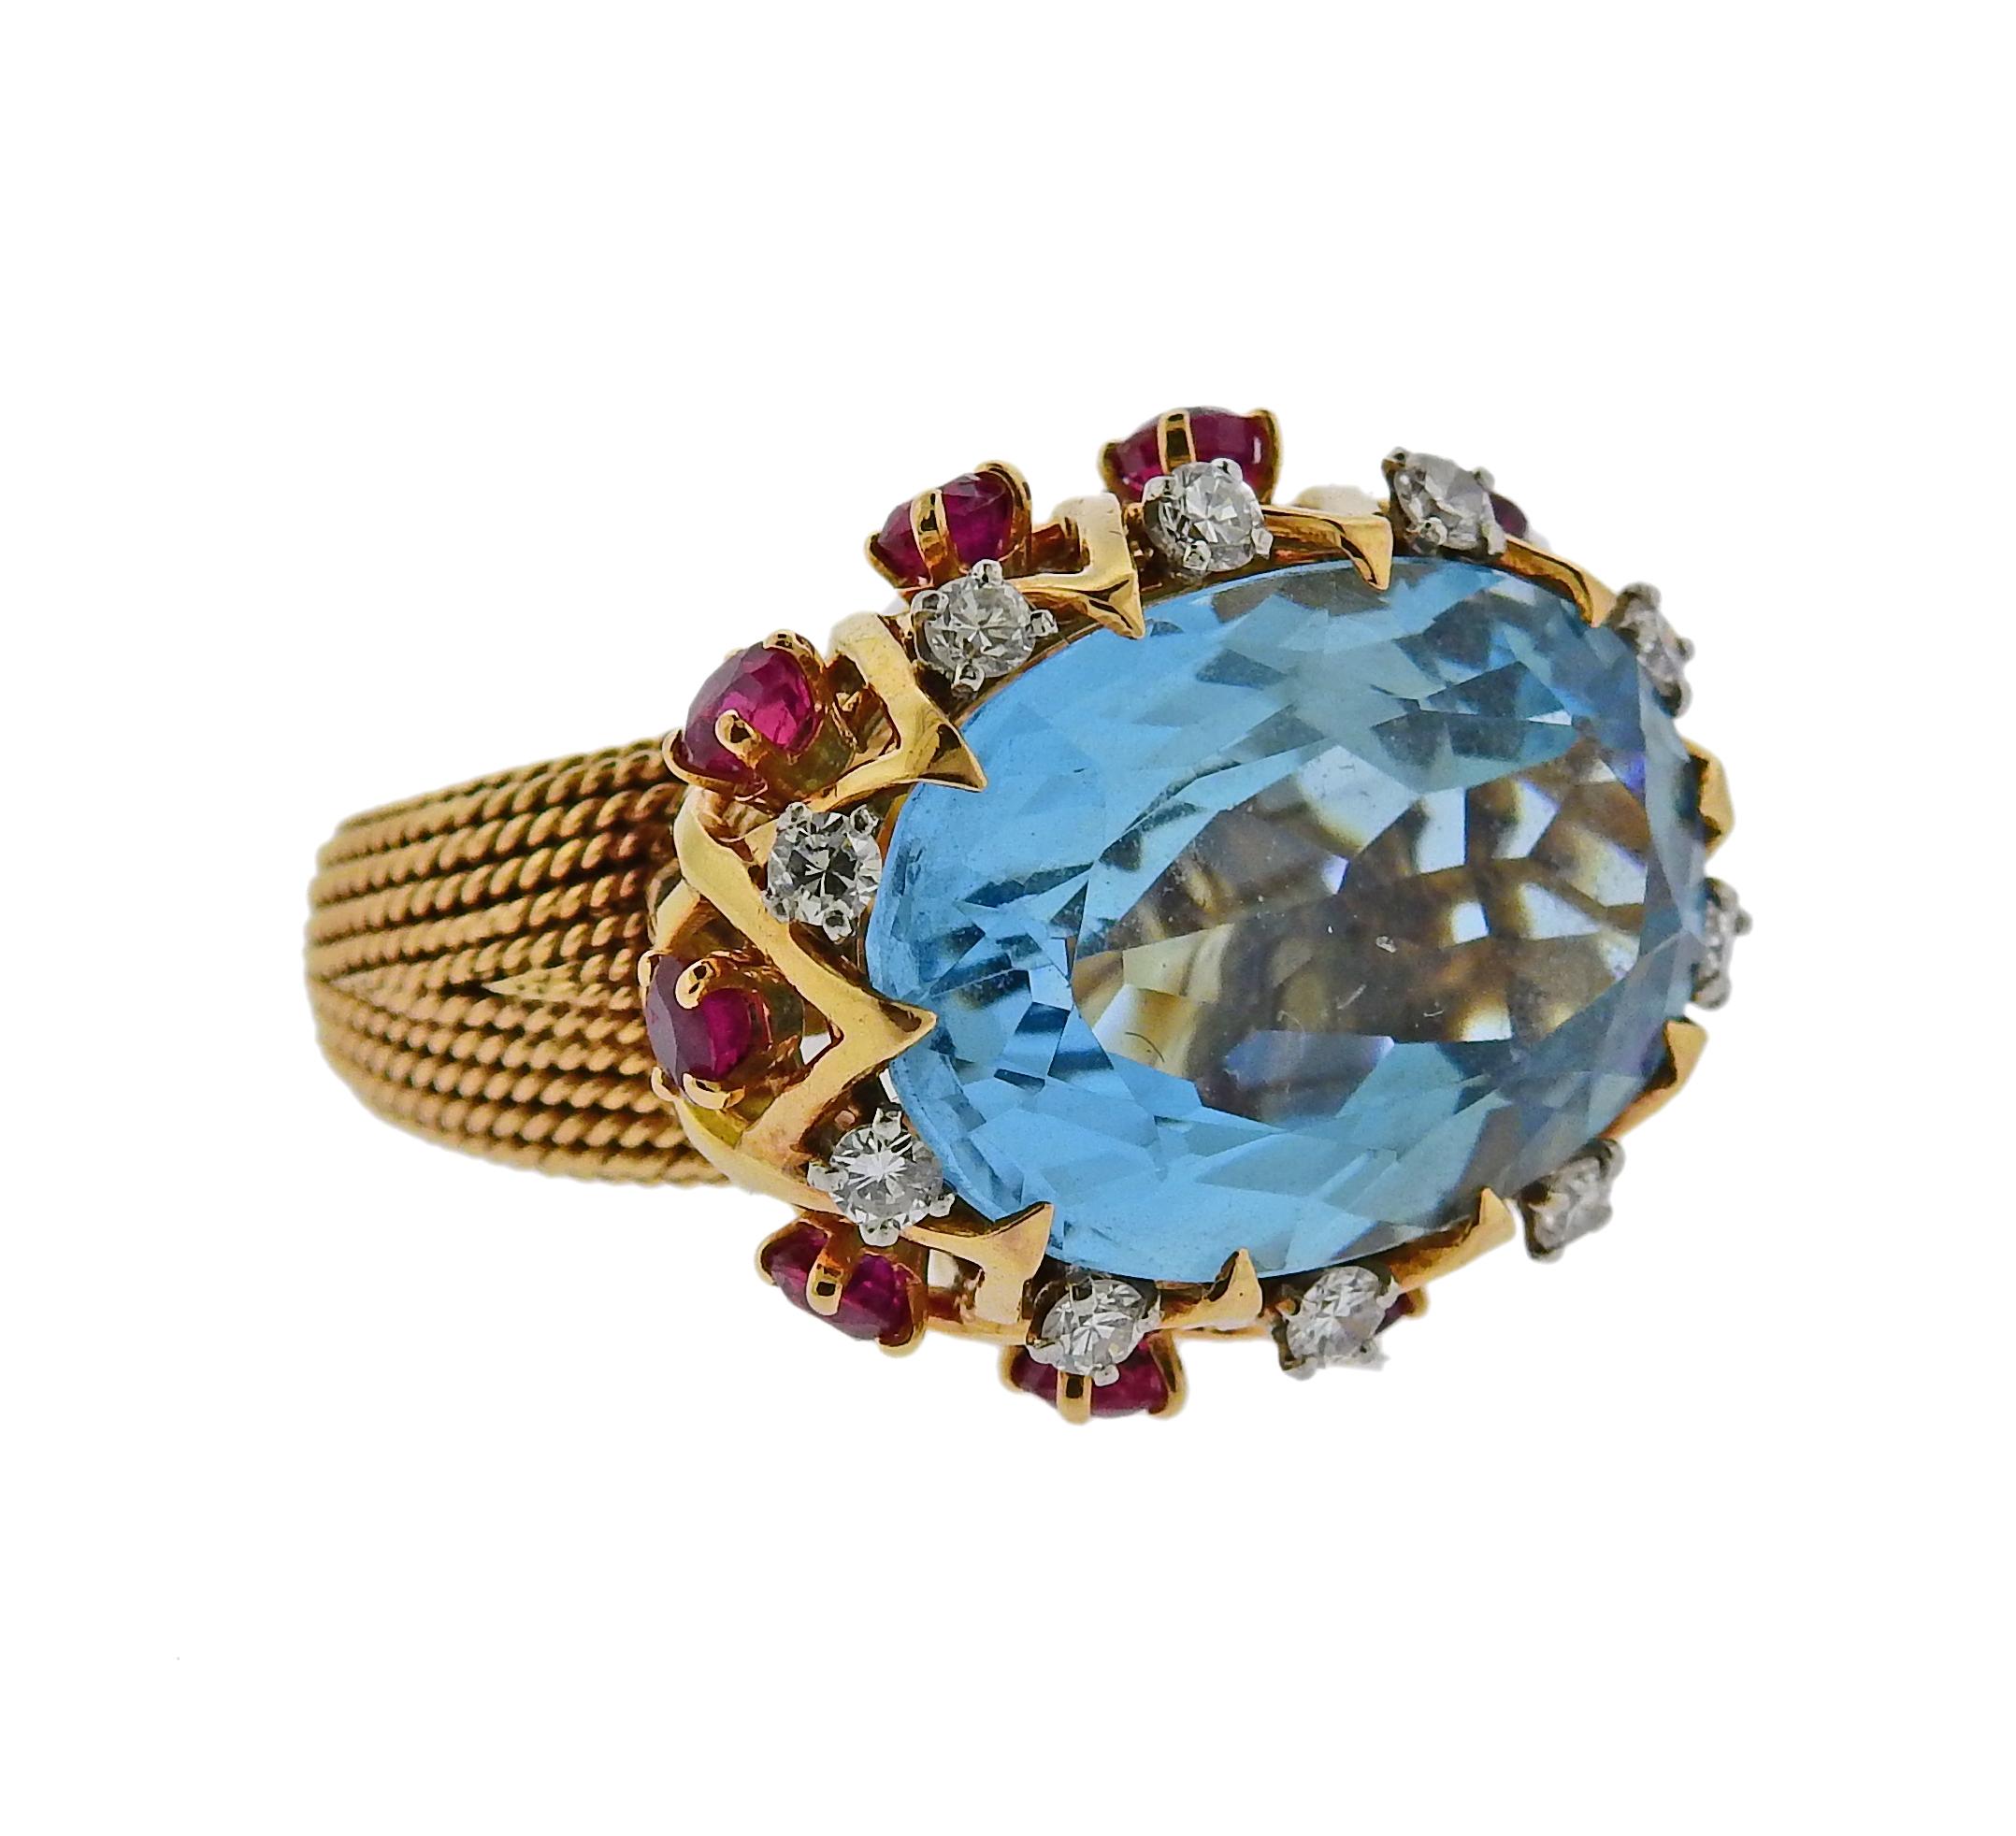 Exquisite vintage Sterle Paris ring, set in 18k yellow gold, featuring an approx. 20 carat aquamarine, surrounded with rubies and approx. 0.40ctw in G/VS diamonds. Ring size - 4.25, top of the ring measures - 21mm x 26mm, sits approx. 15mm from the